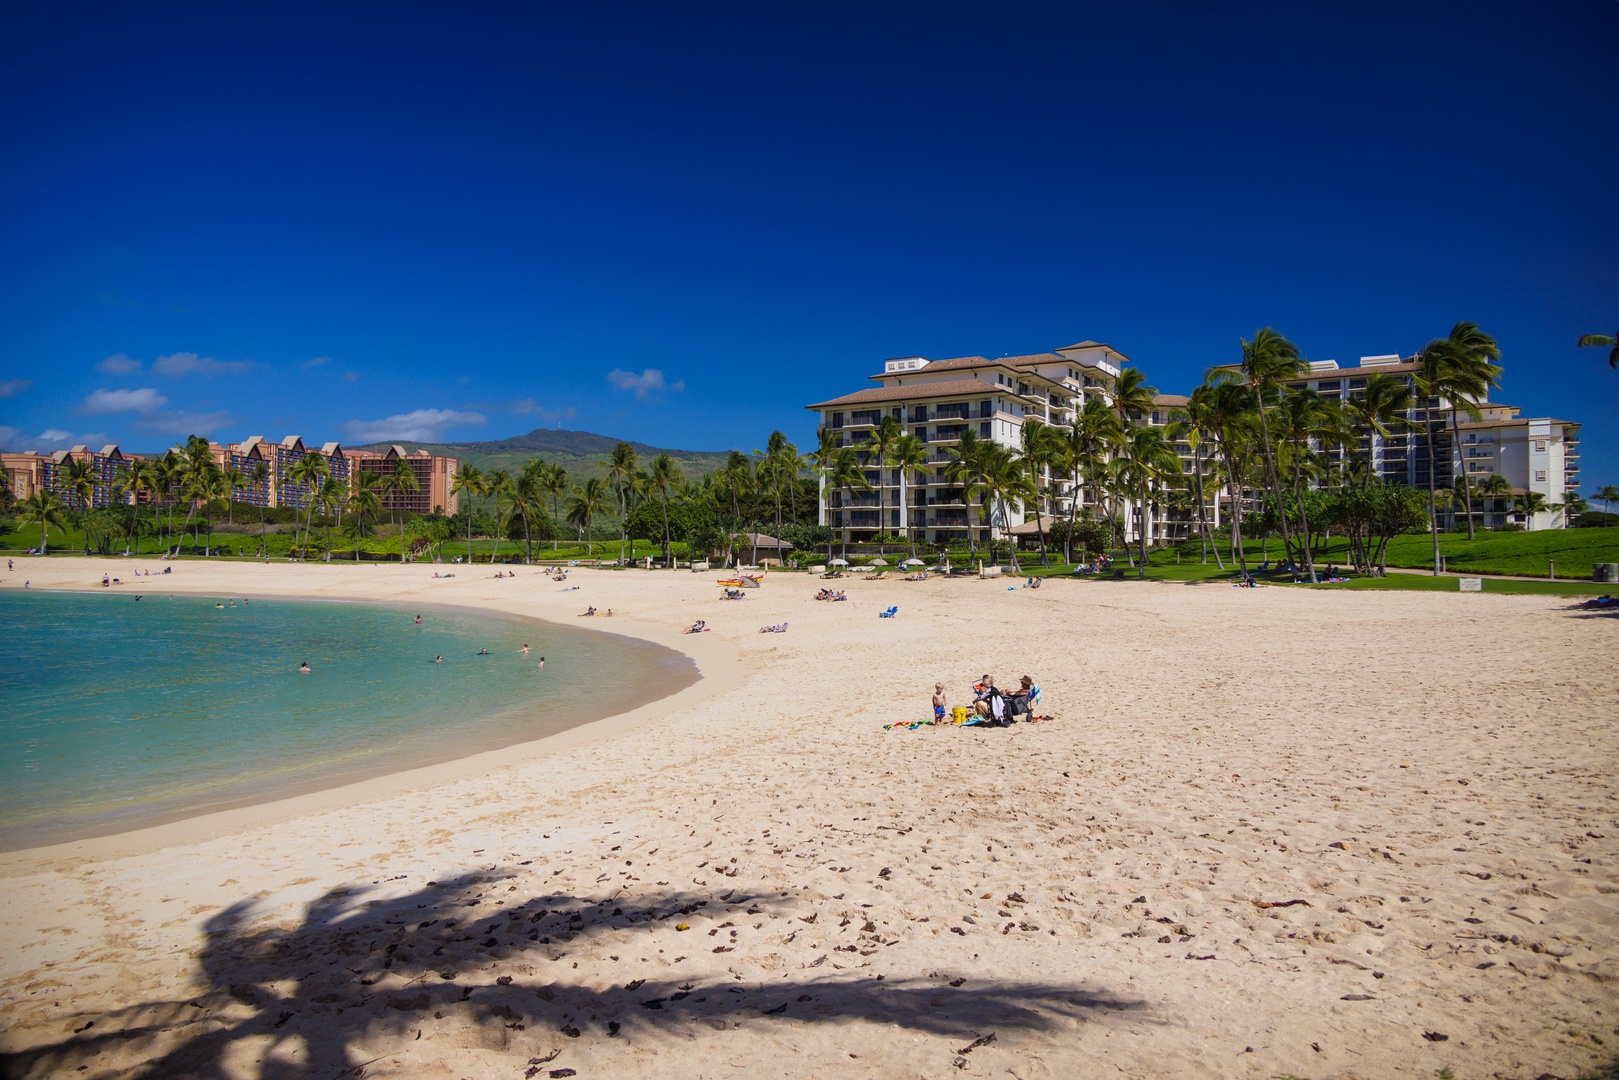 Kapolei Vacation Rentals, Ko Olina Kai 1033A - Ko Olina's private lagoons with soft sands and crystal blue water, perfect for afternoon swim or spectacular views